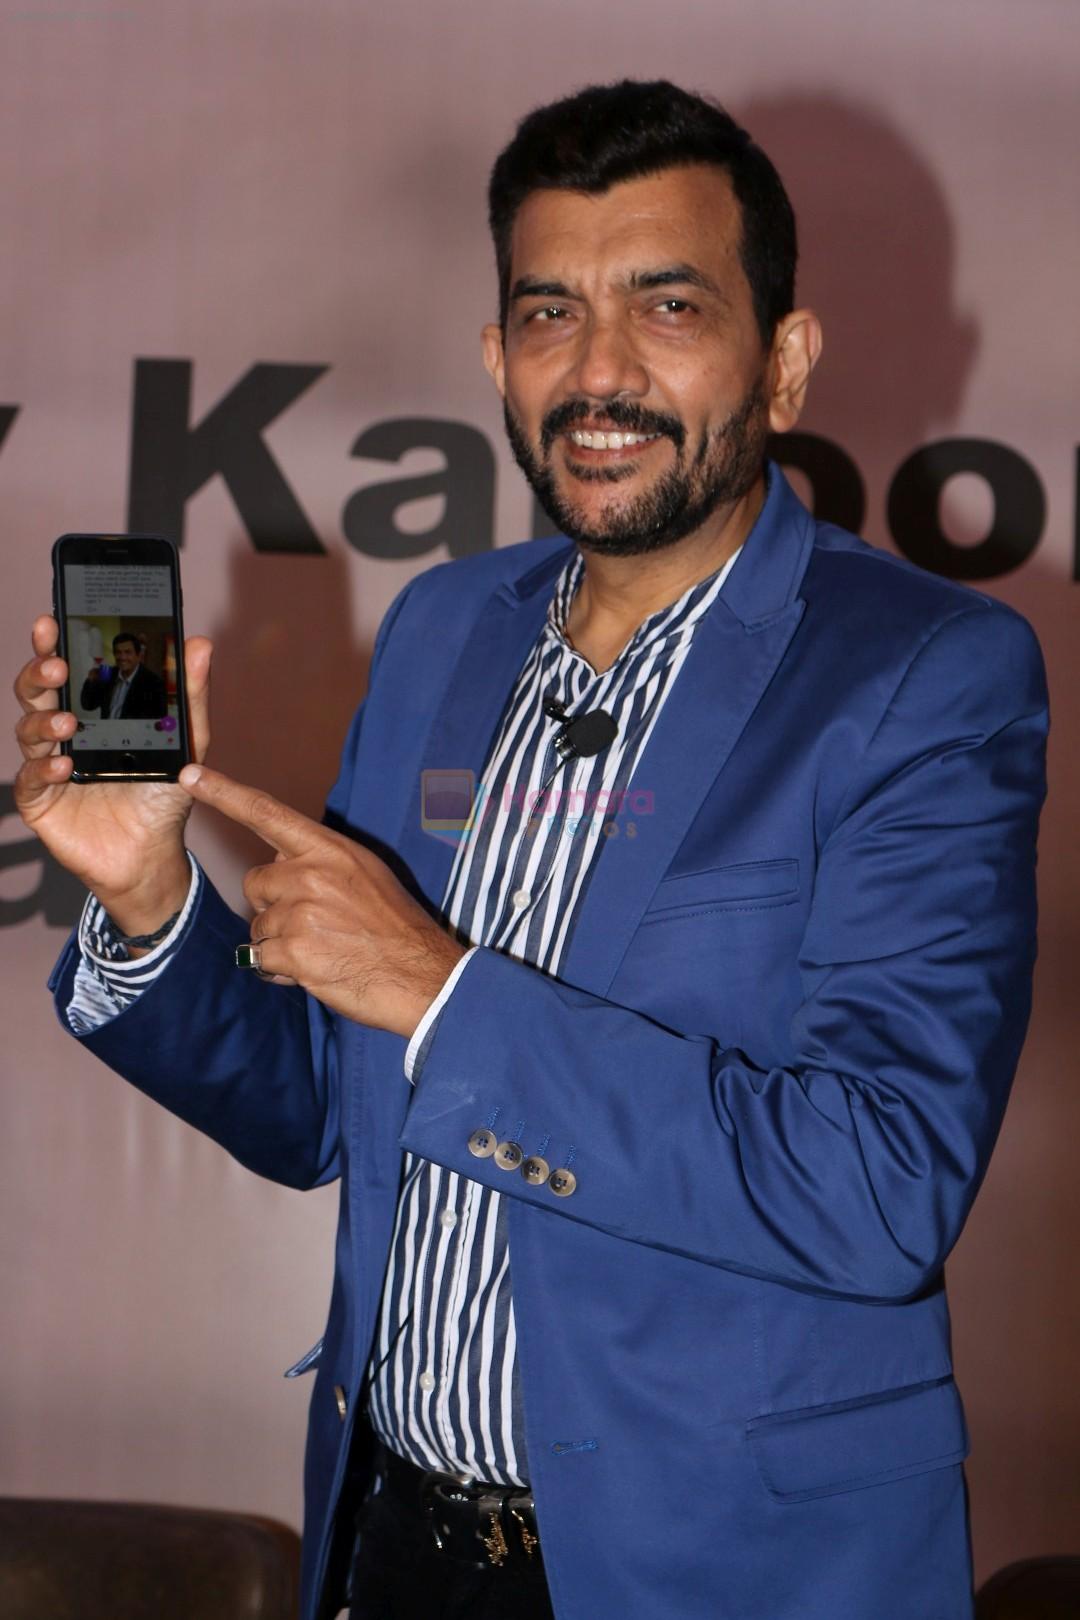 Sanjeev Kapoor's Mobile App Launch on 31st March 2017